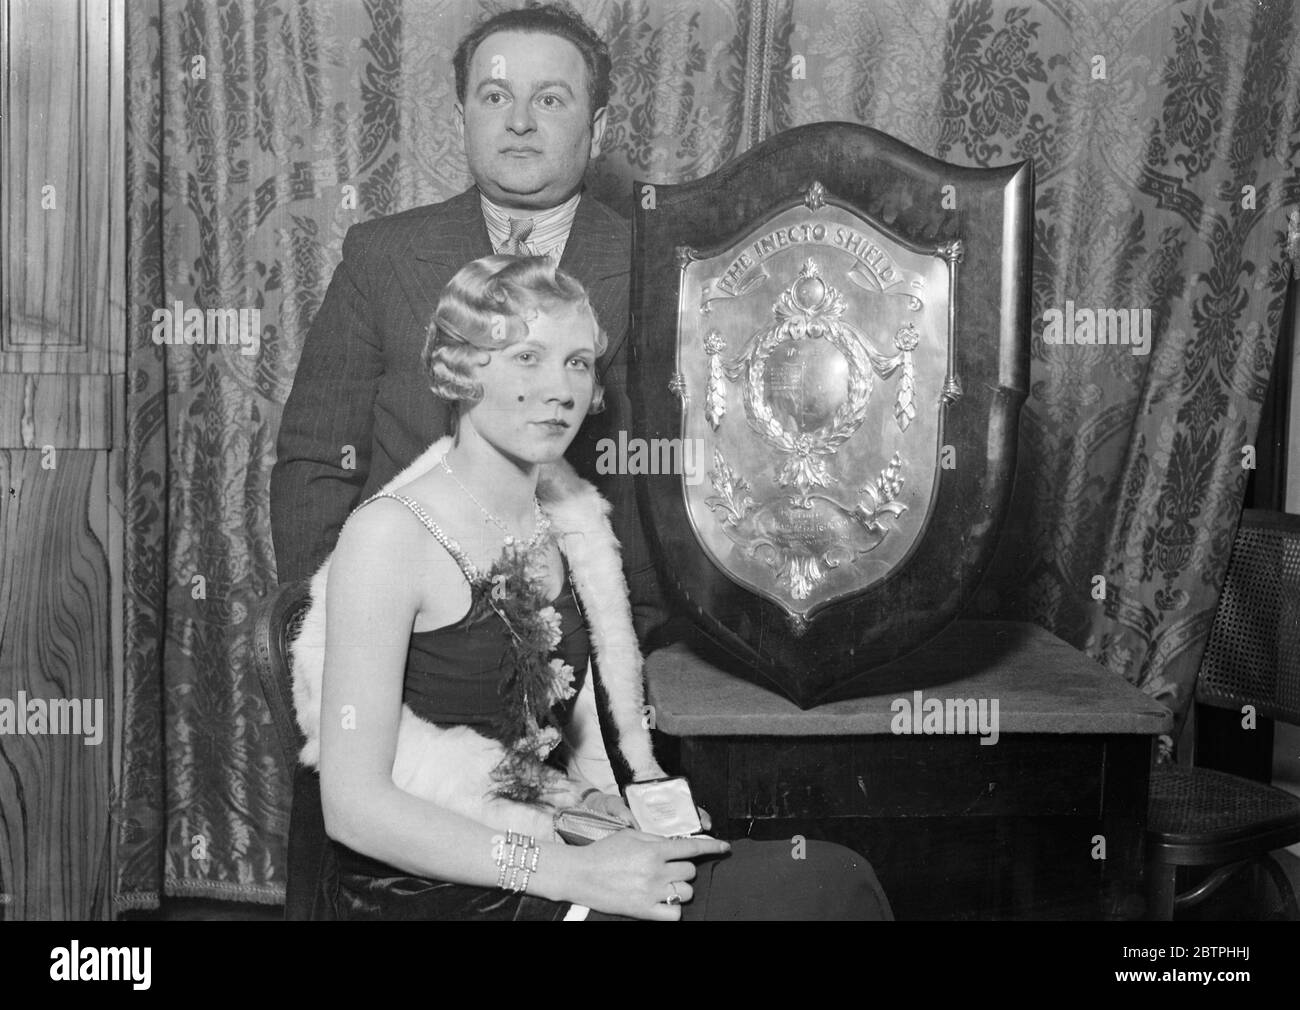 Champion hairdresser Mr Alfred Balbus was judged the champion man hairdresser and Miss Annette Ost the champion lady hairdresser at a contest for spring fashions at the Lyons House ,